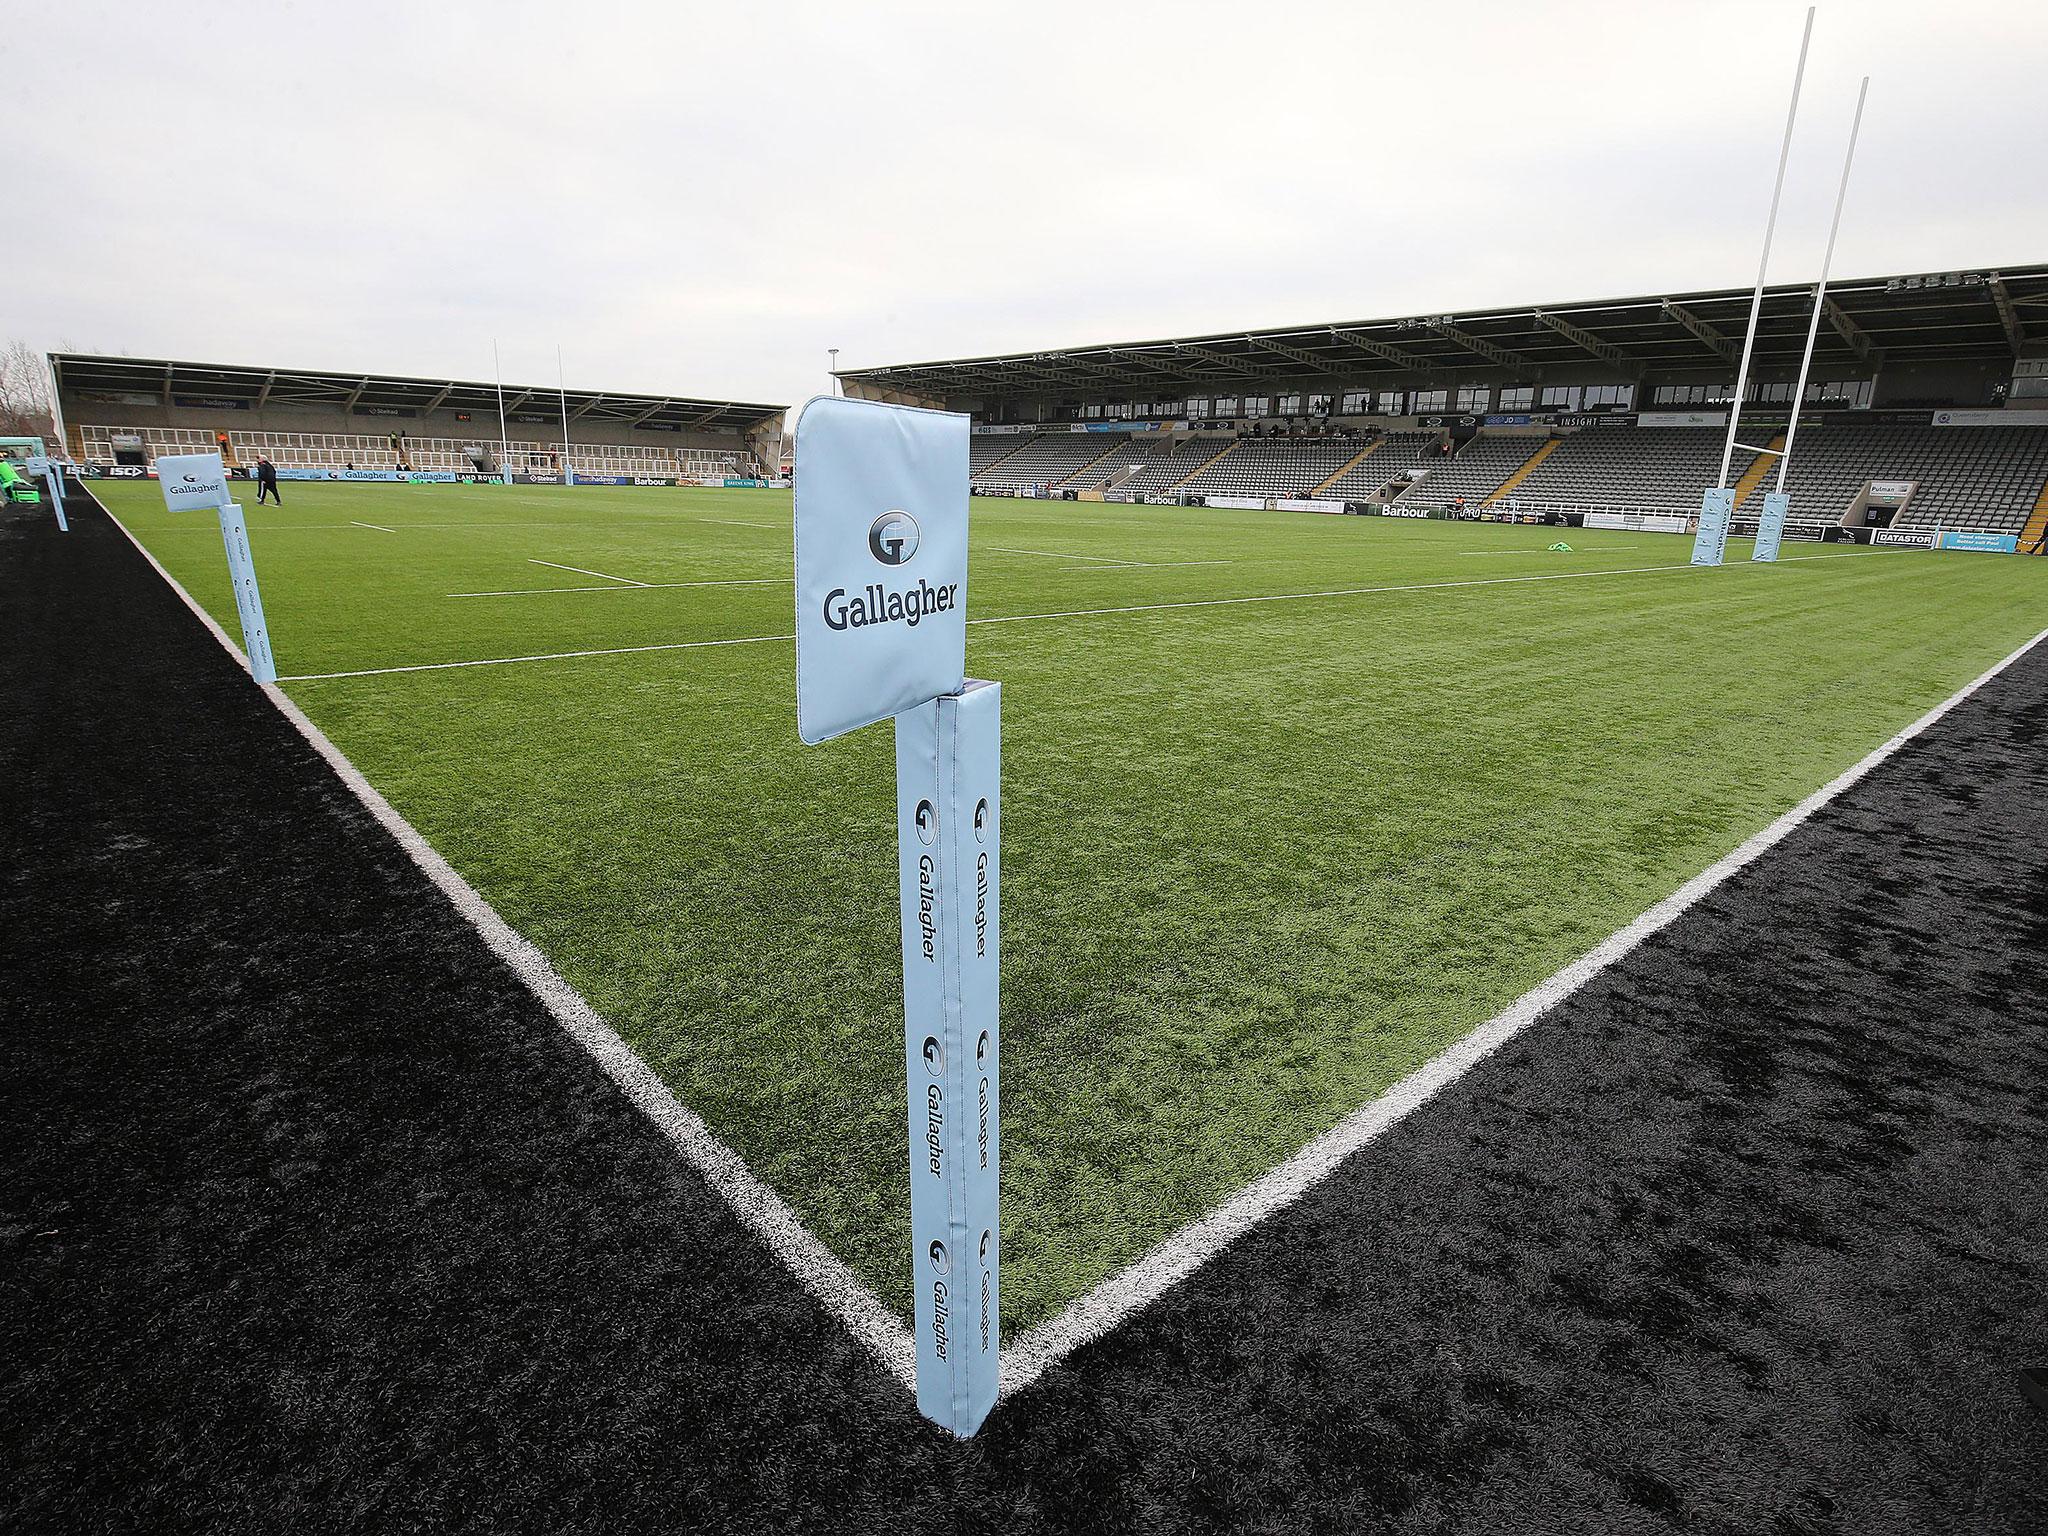 Premiership Rugby have played down reports of a breakaway threat from the RFU over ring-fencing